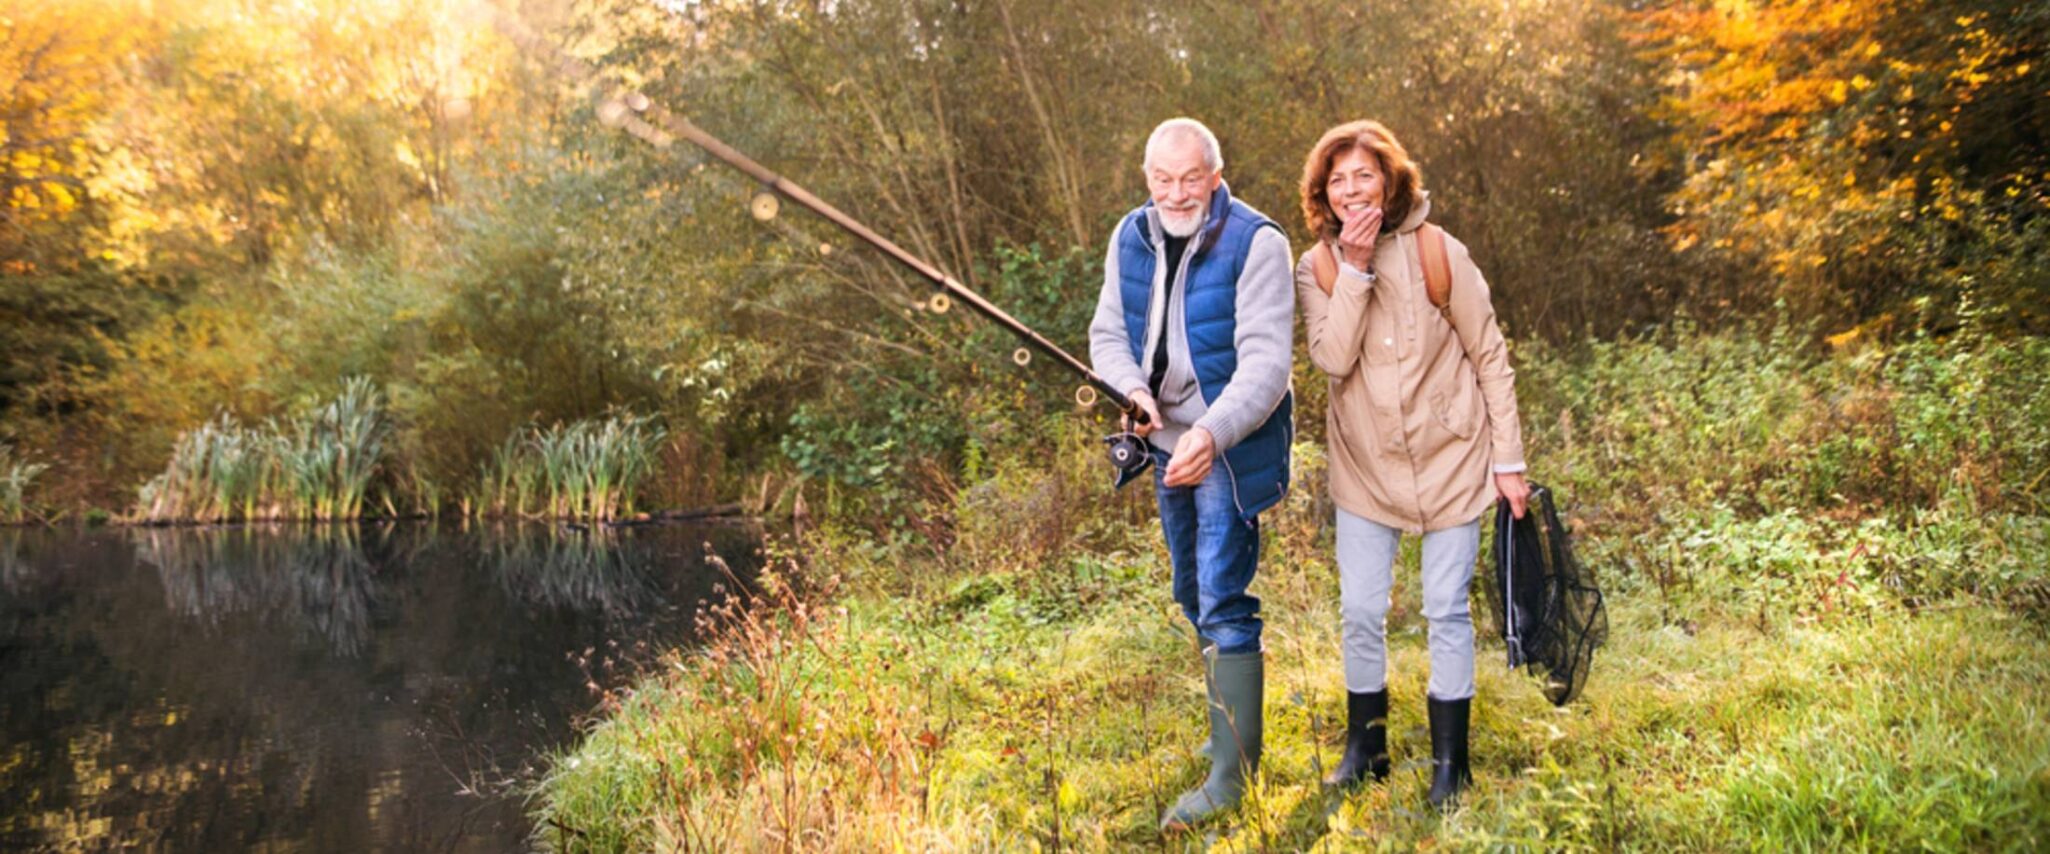 A senior couple going fishing amid a scenic wooded area.